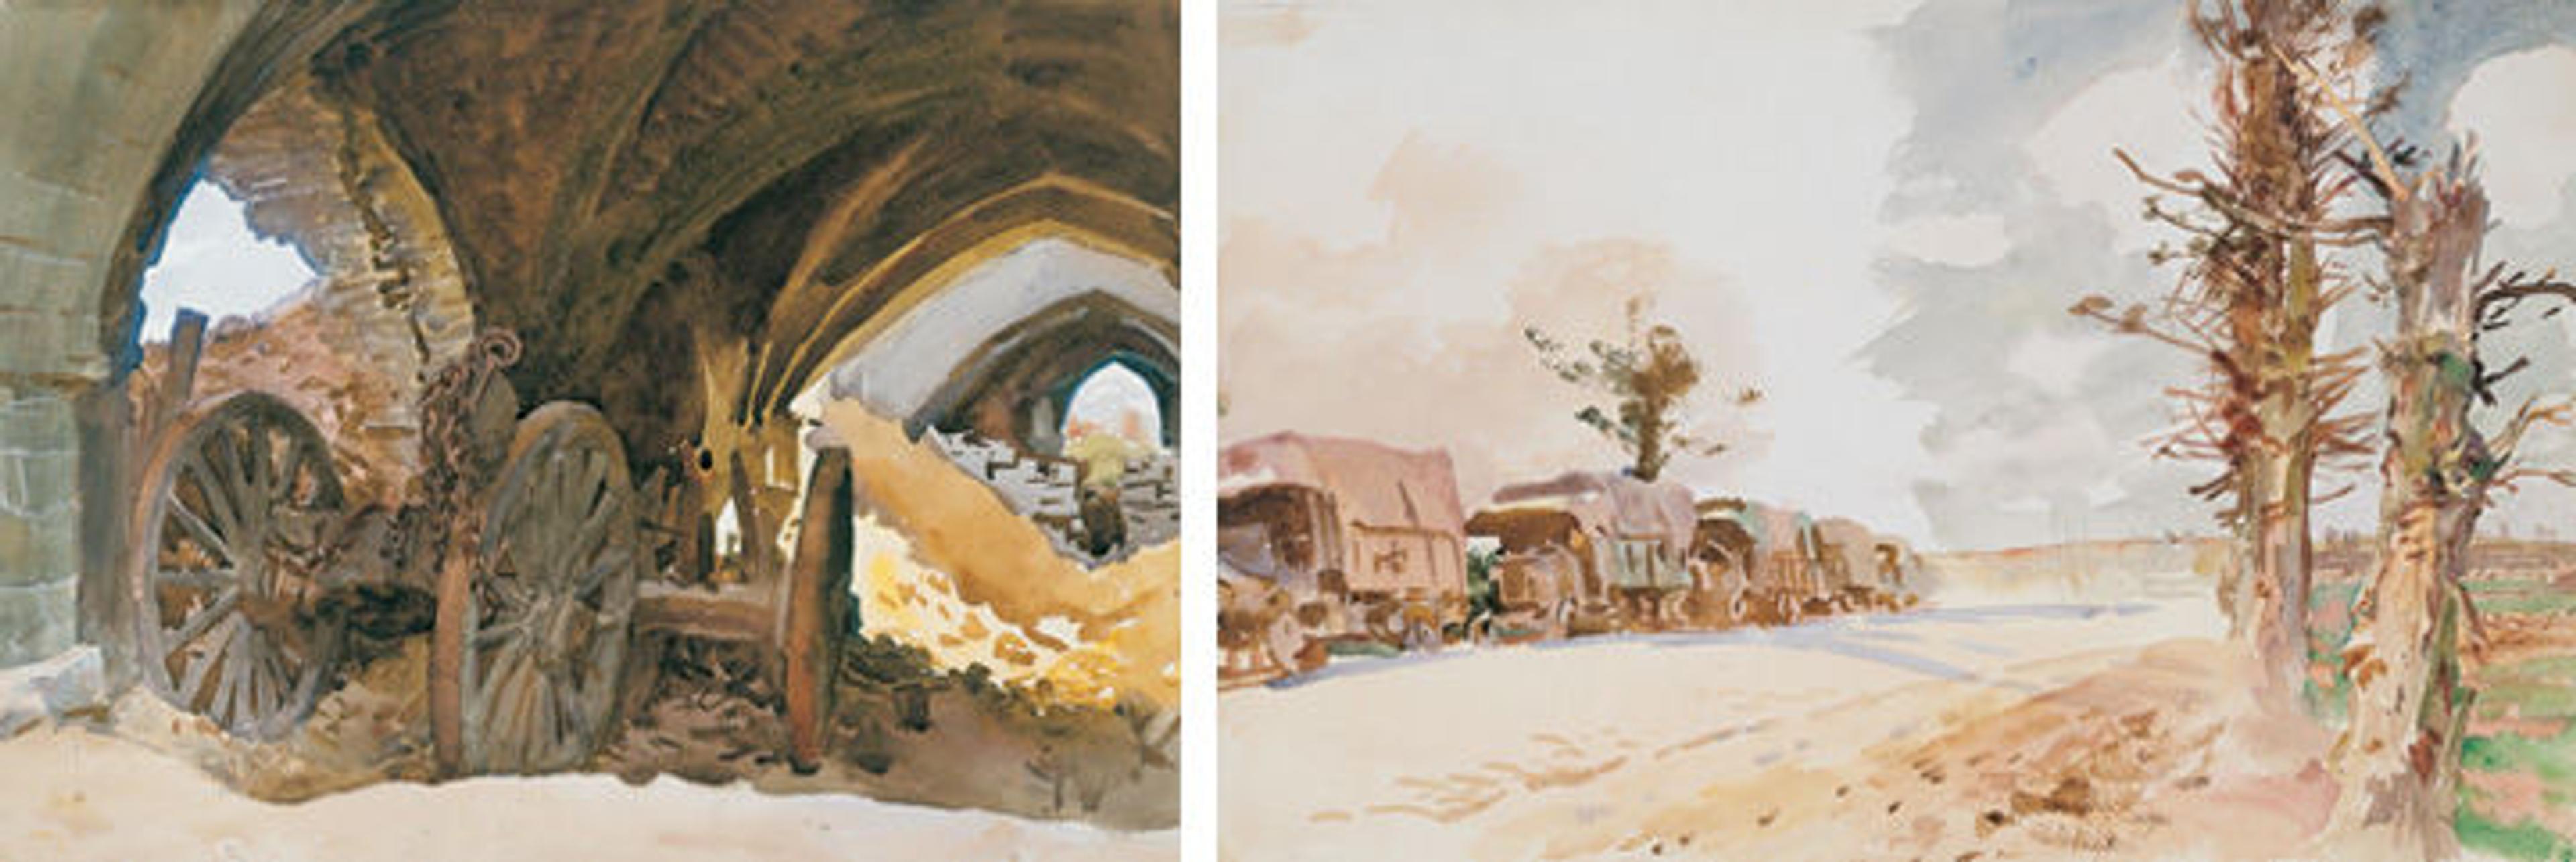 Two World War I watercolors by John Singer Sargent: 'Wheels in Vault' (left), showing a cannon amidst the rubble of a church; and 'Truck Convoy' (right), depicting a line of trucks against a barren road